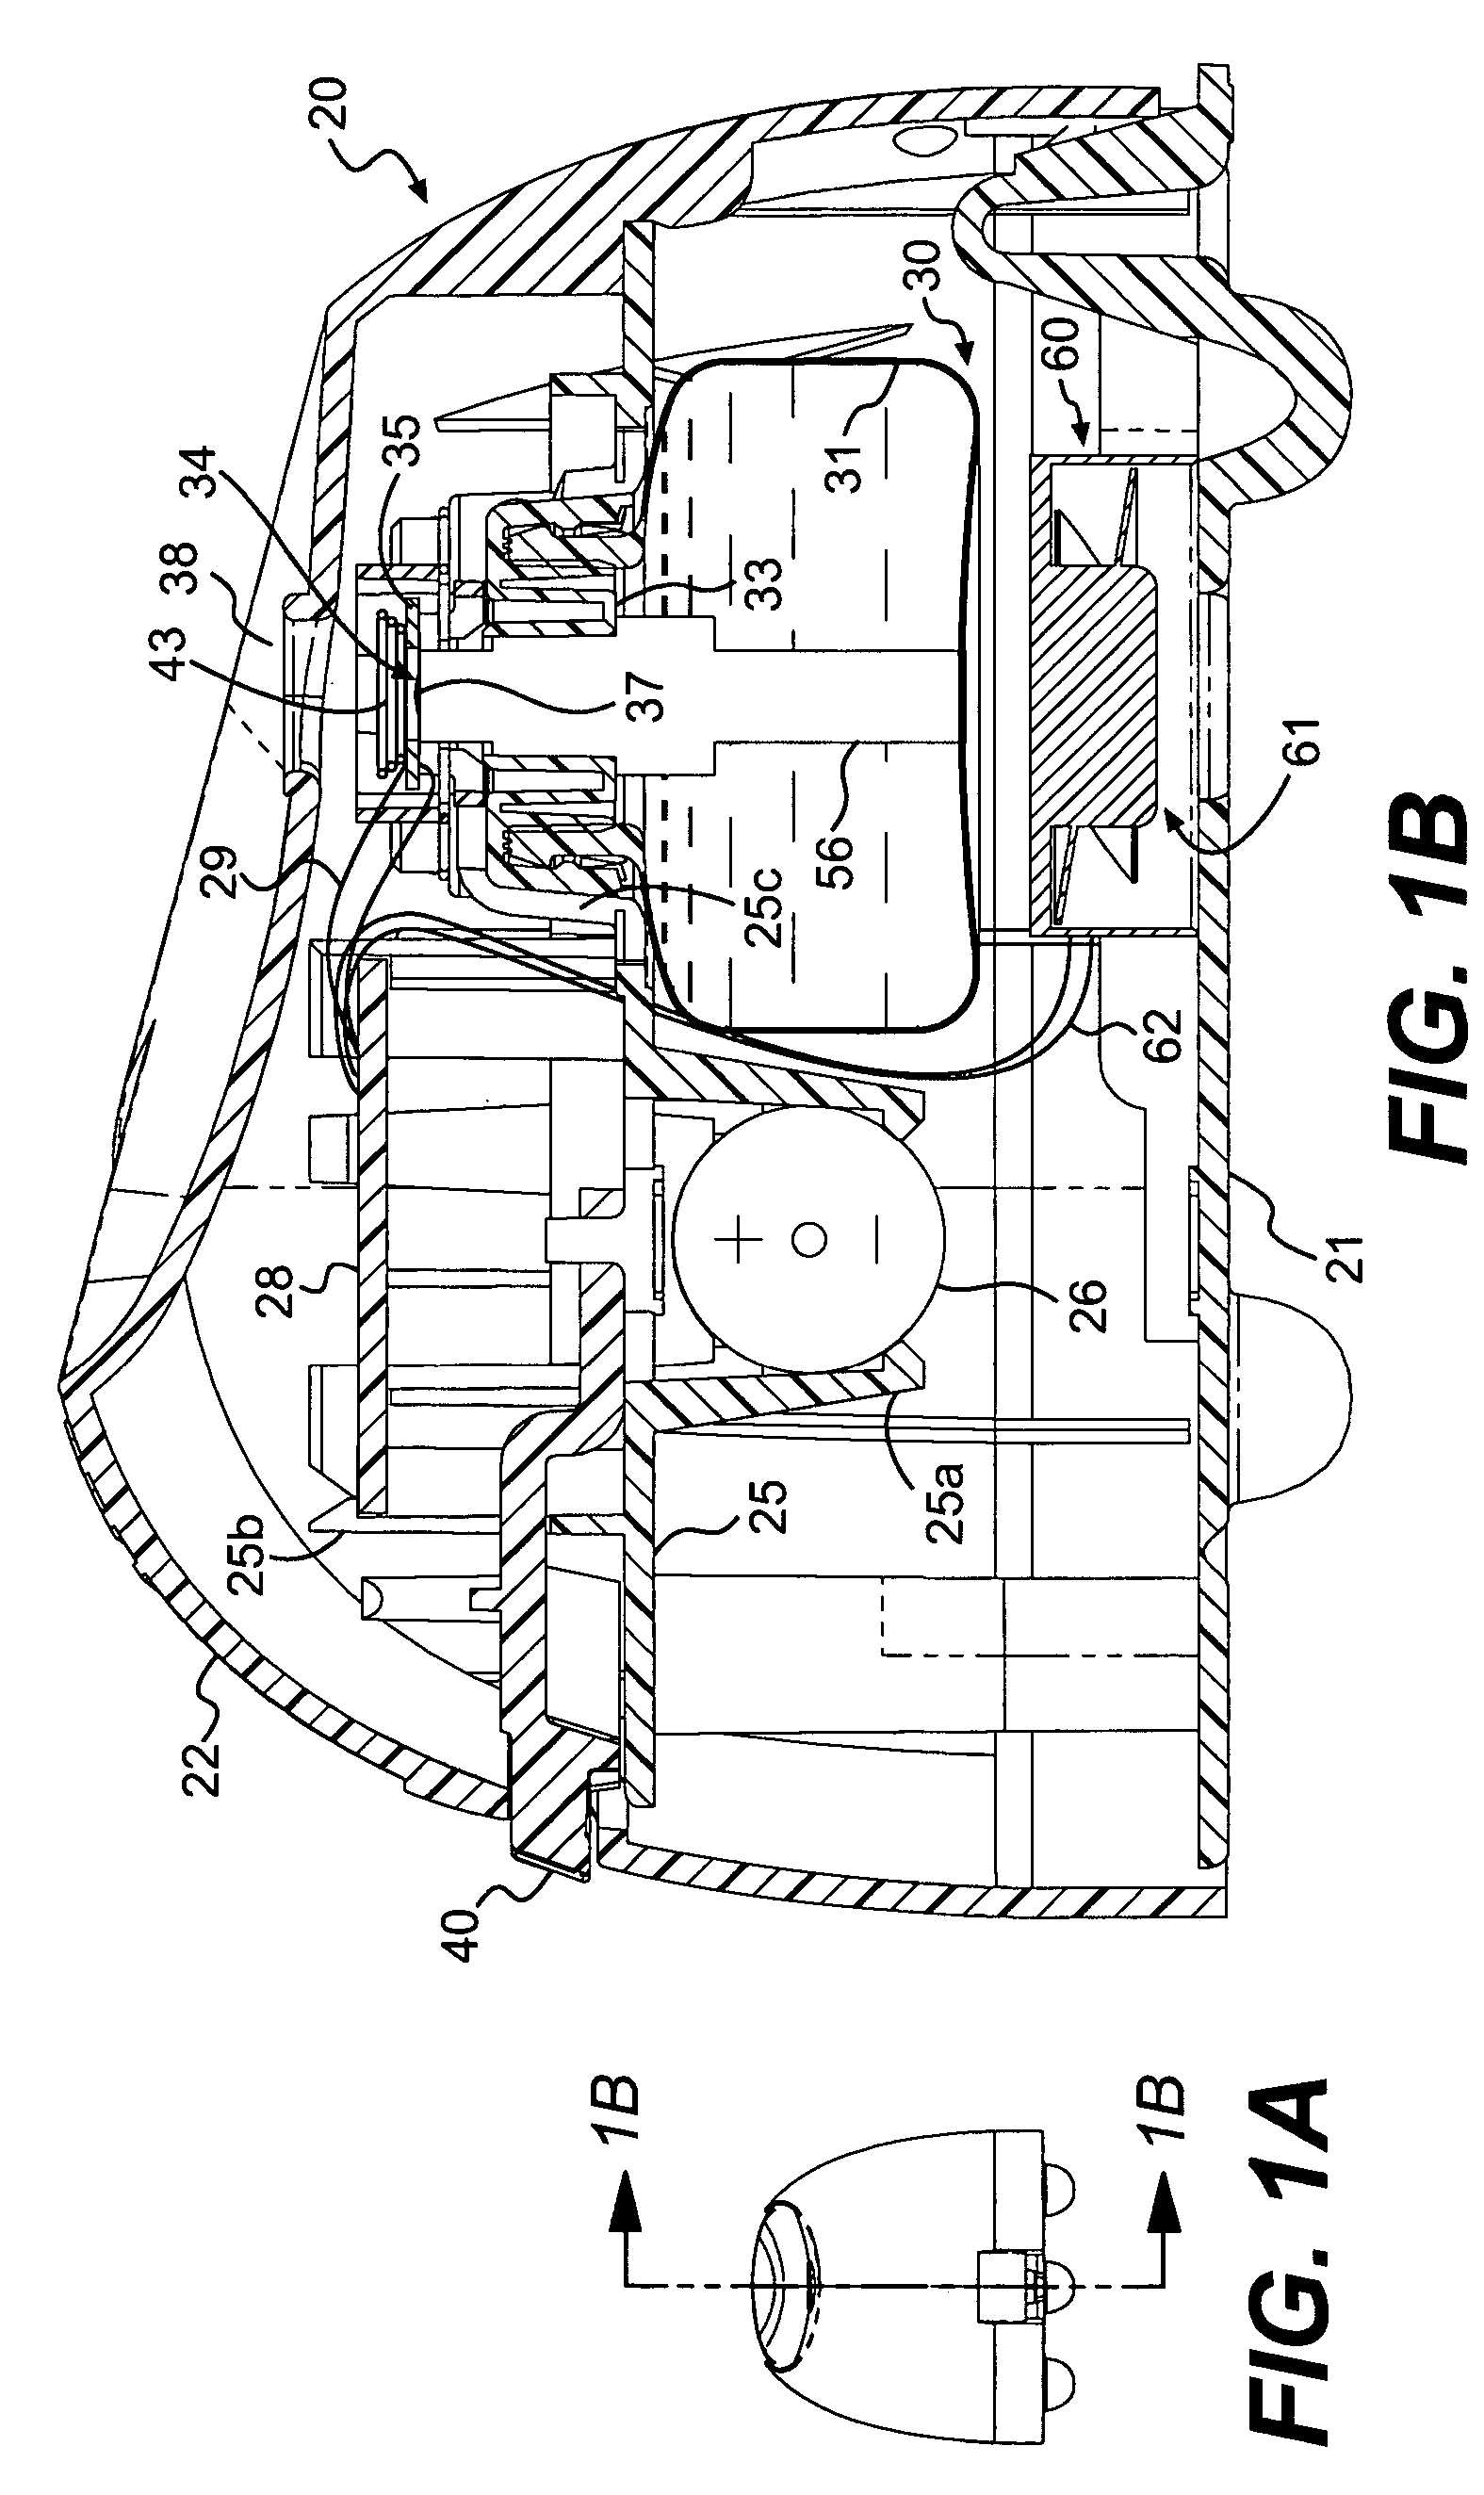 Liquid atomizing device with reduced settling of atomized liquid droplets